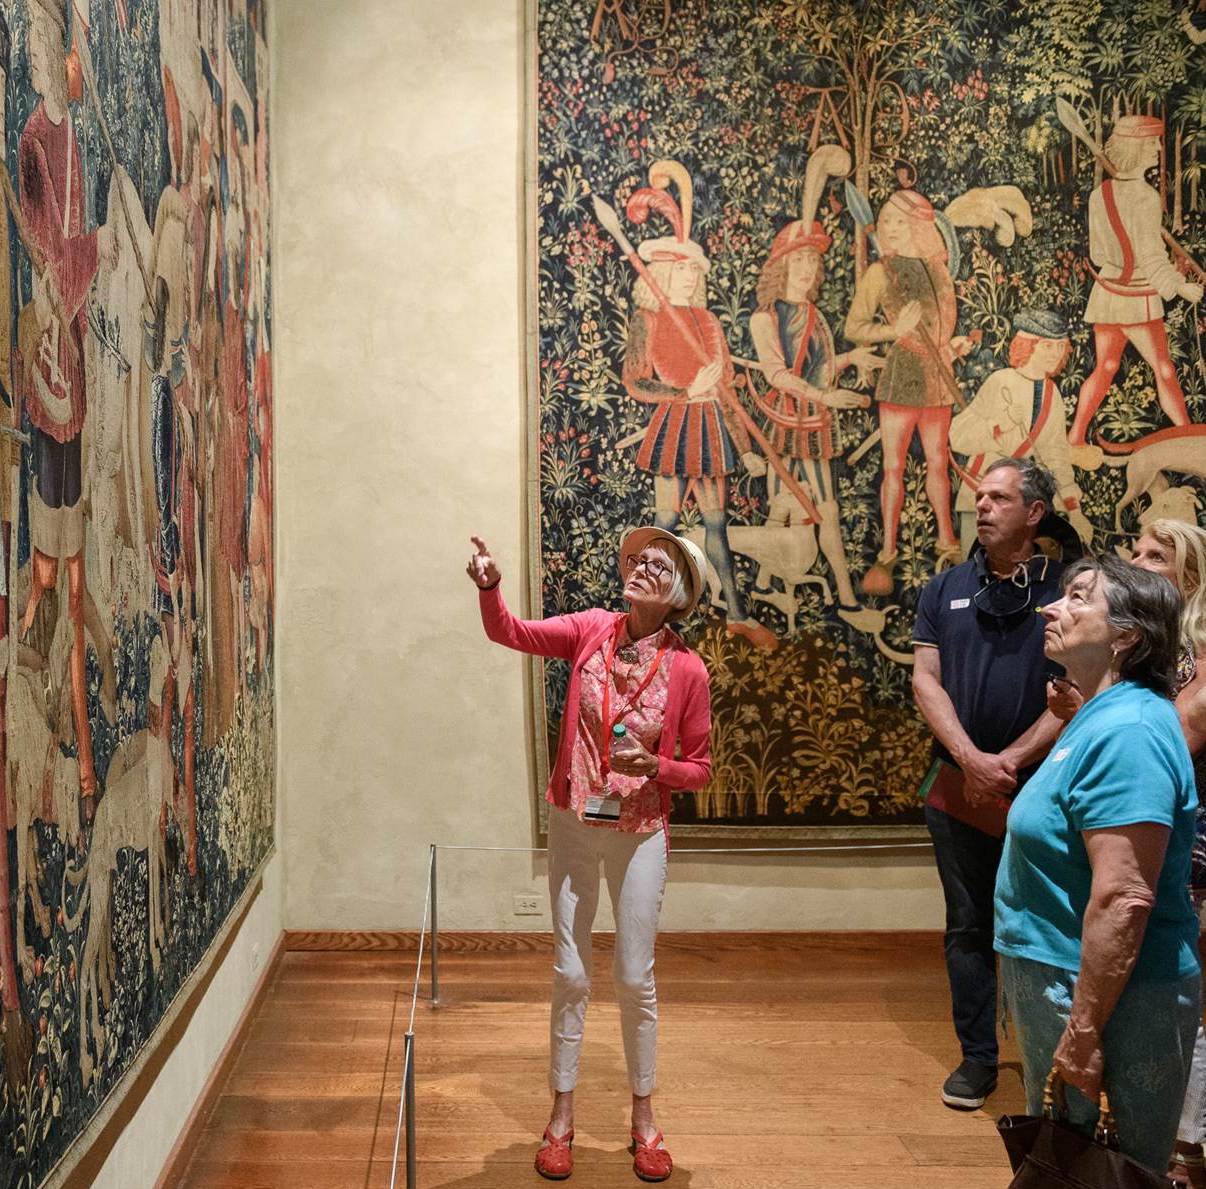 An older woman in a pink cardigan leads a group of visitors and points to a hanging medieval tapestry at The Met Cloisters.